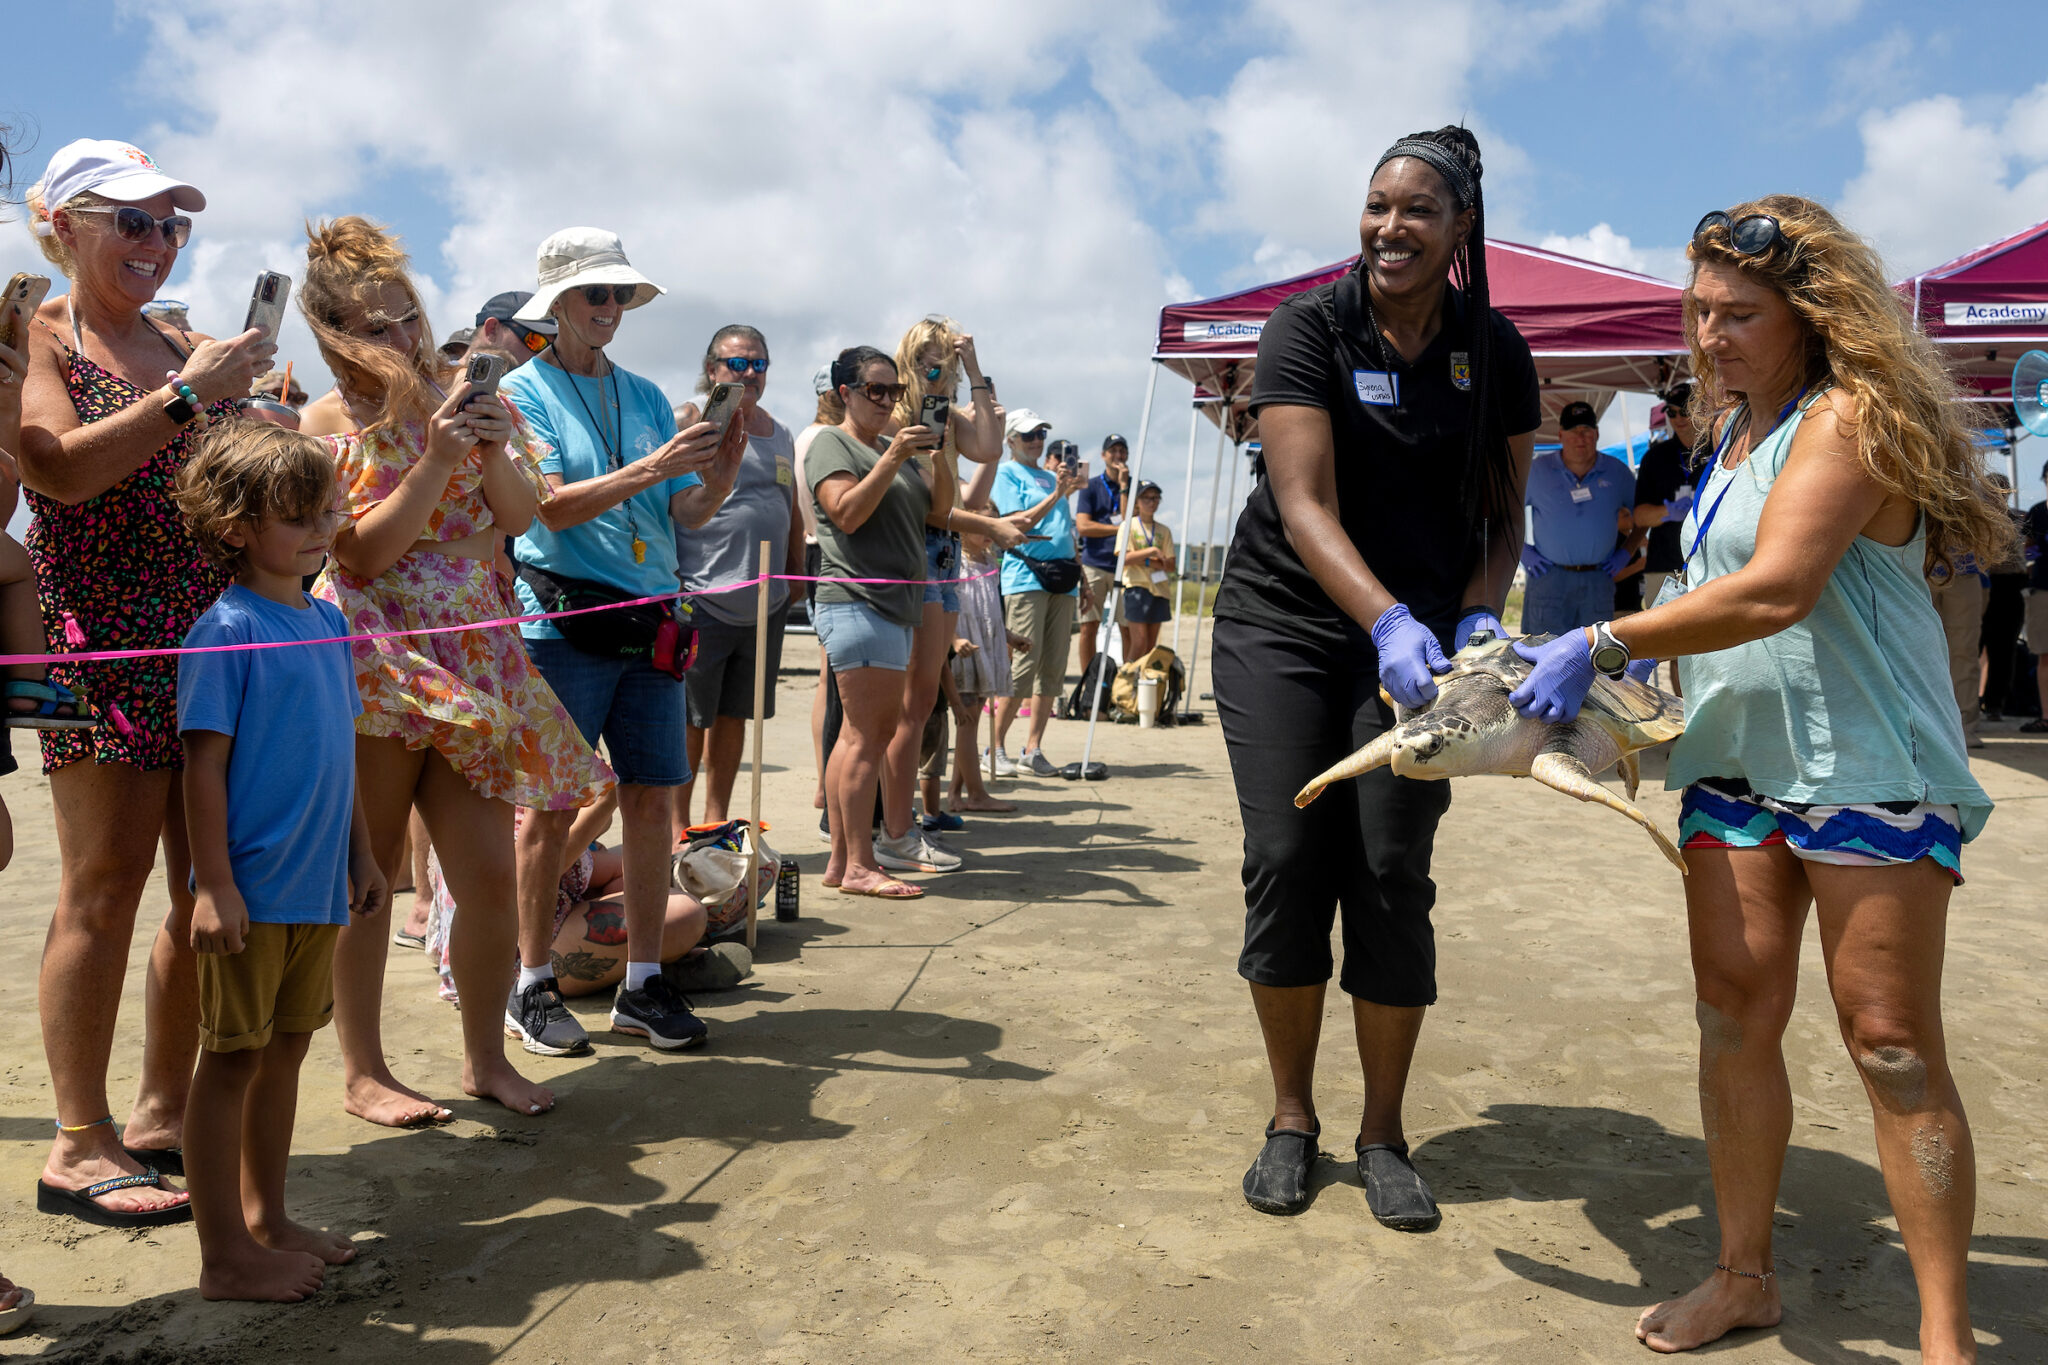 U.S. Fish and Wildlife Service Senior Biologist Syrena Johnson carries Tally the sea turtle down the beach alongside Frankie Hobro, director and owner of the Anglesey Sea Zoo in Wales as a crowd of spectators watch, smiling and in some cases documenting with their cell phones